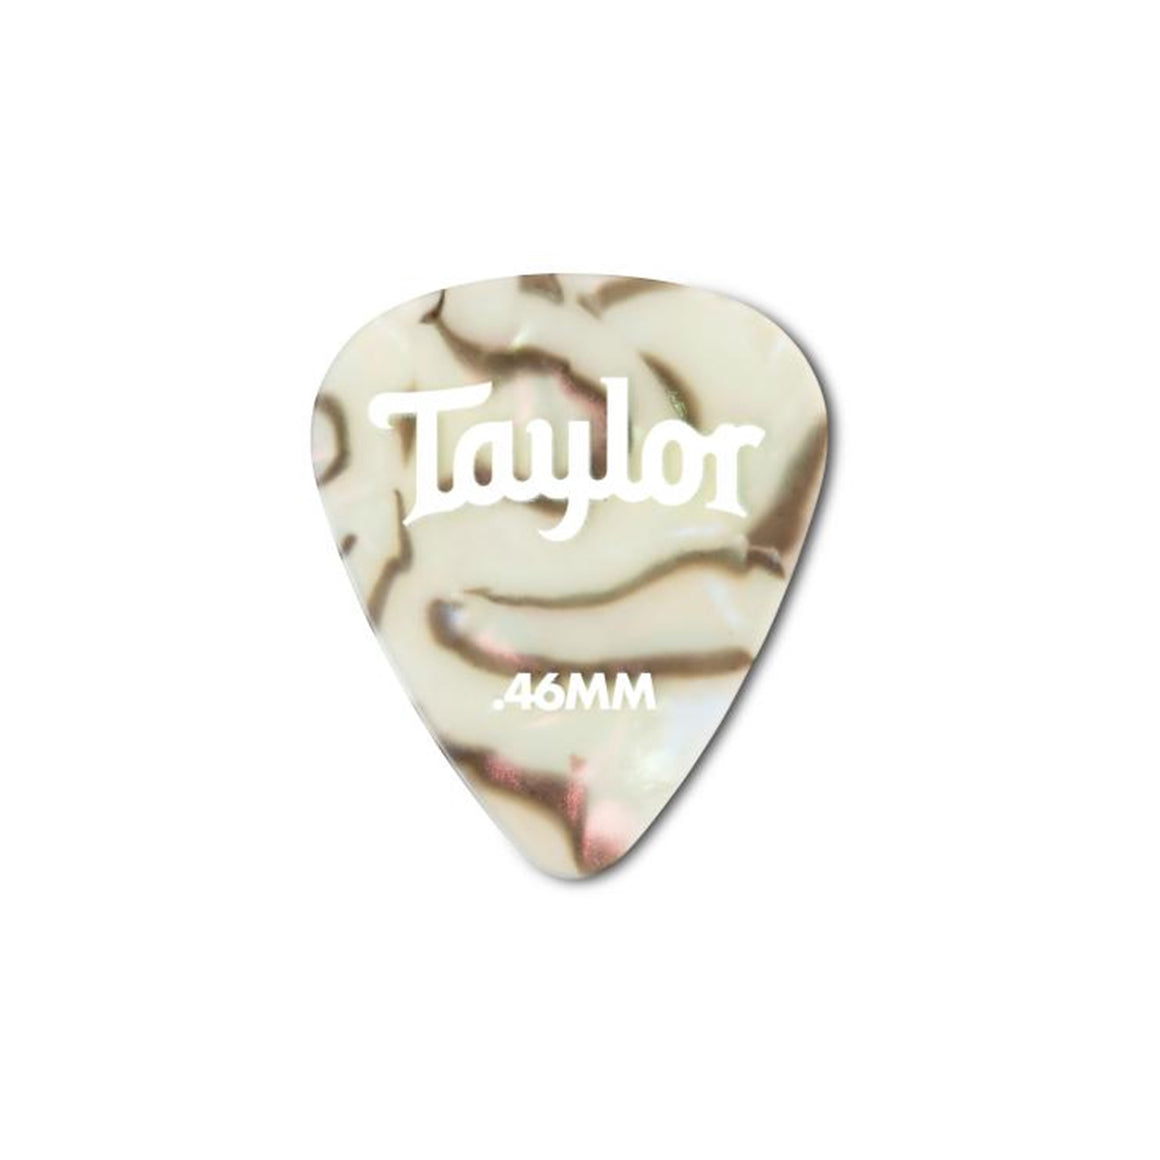 Taylor 80737 Celluloid 351 Picks, Abalone, 1.21mm,12-Pack